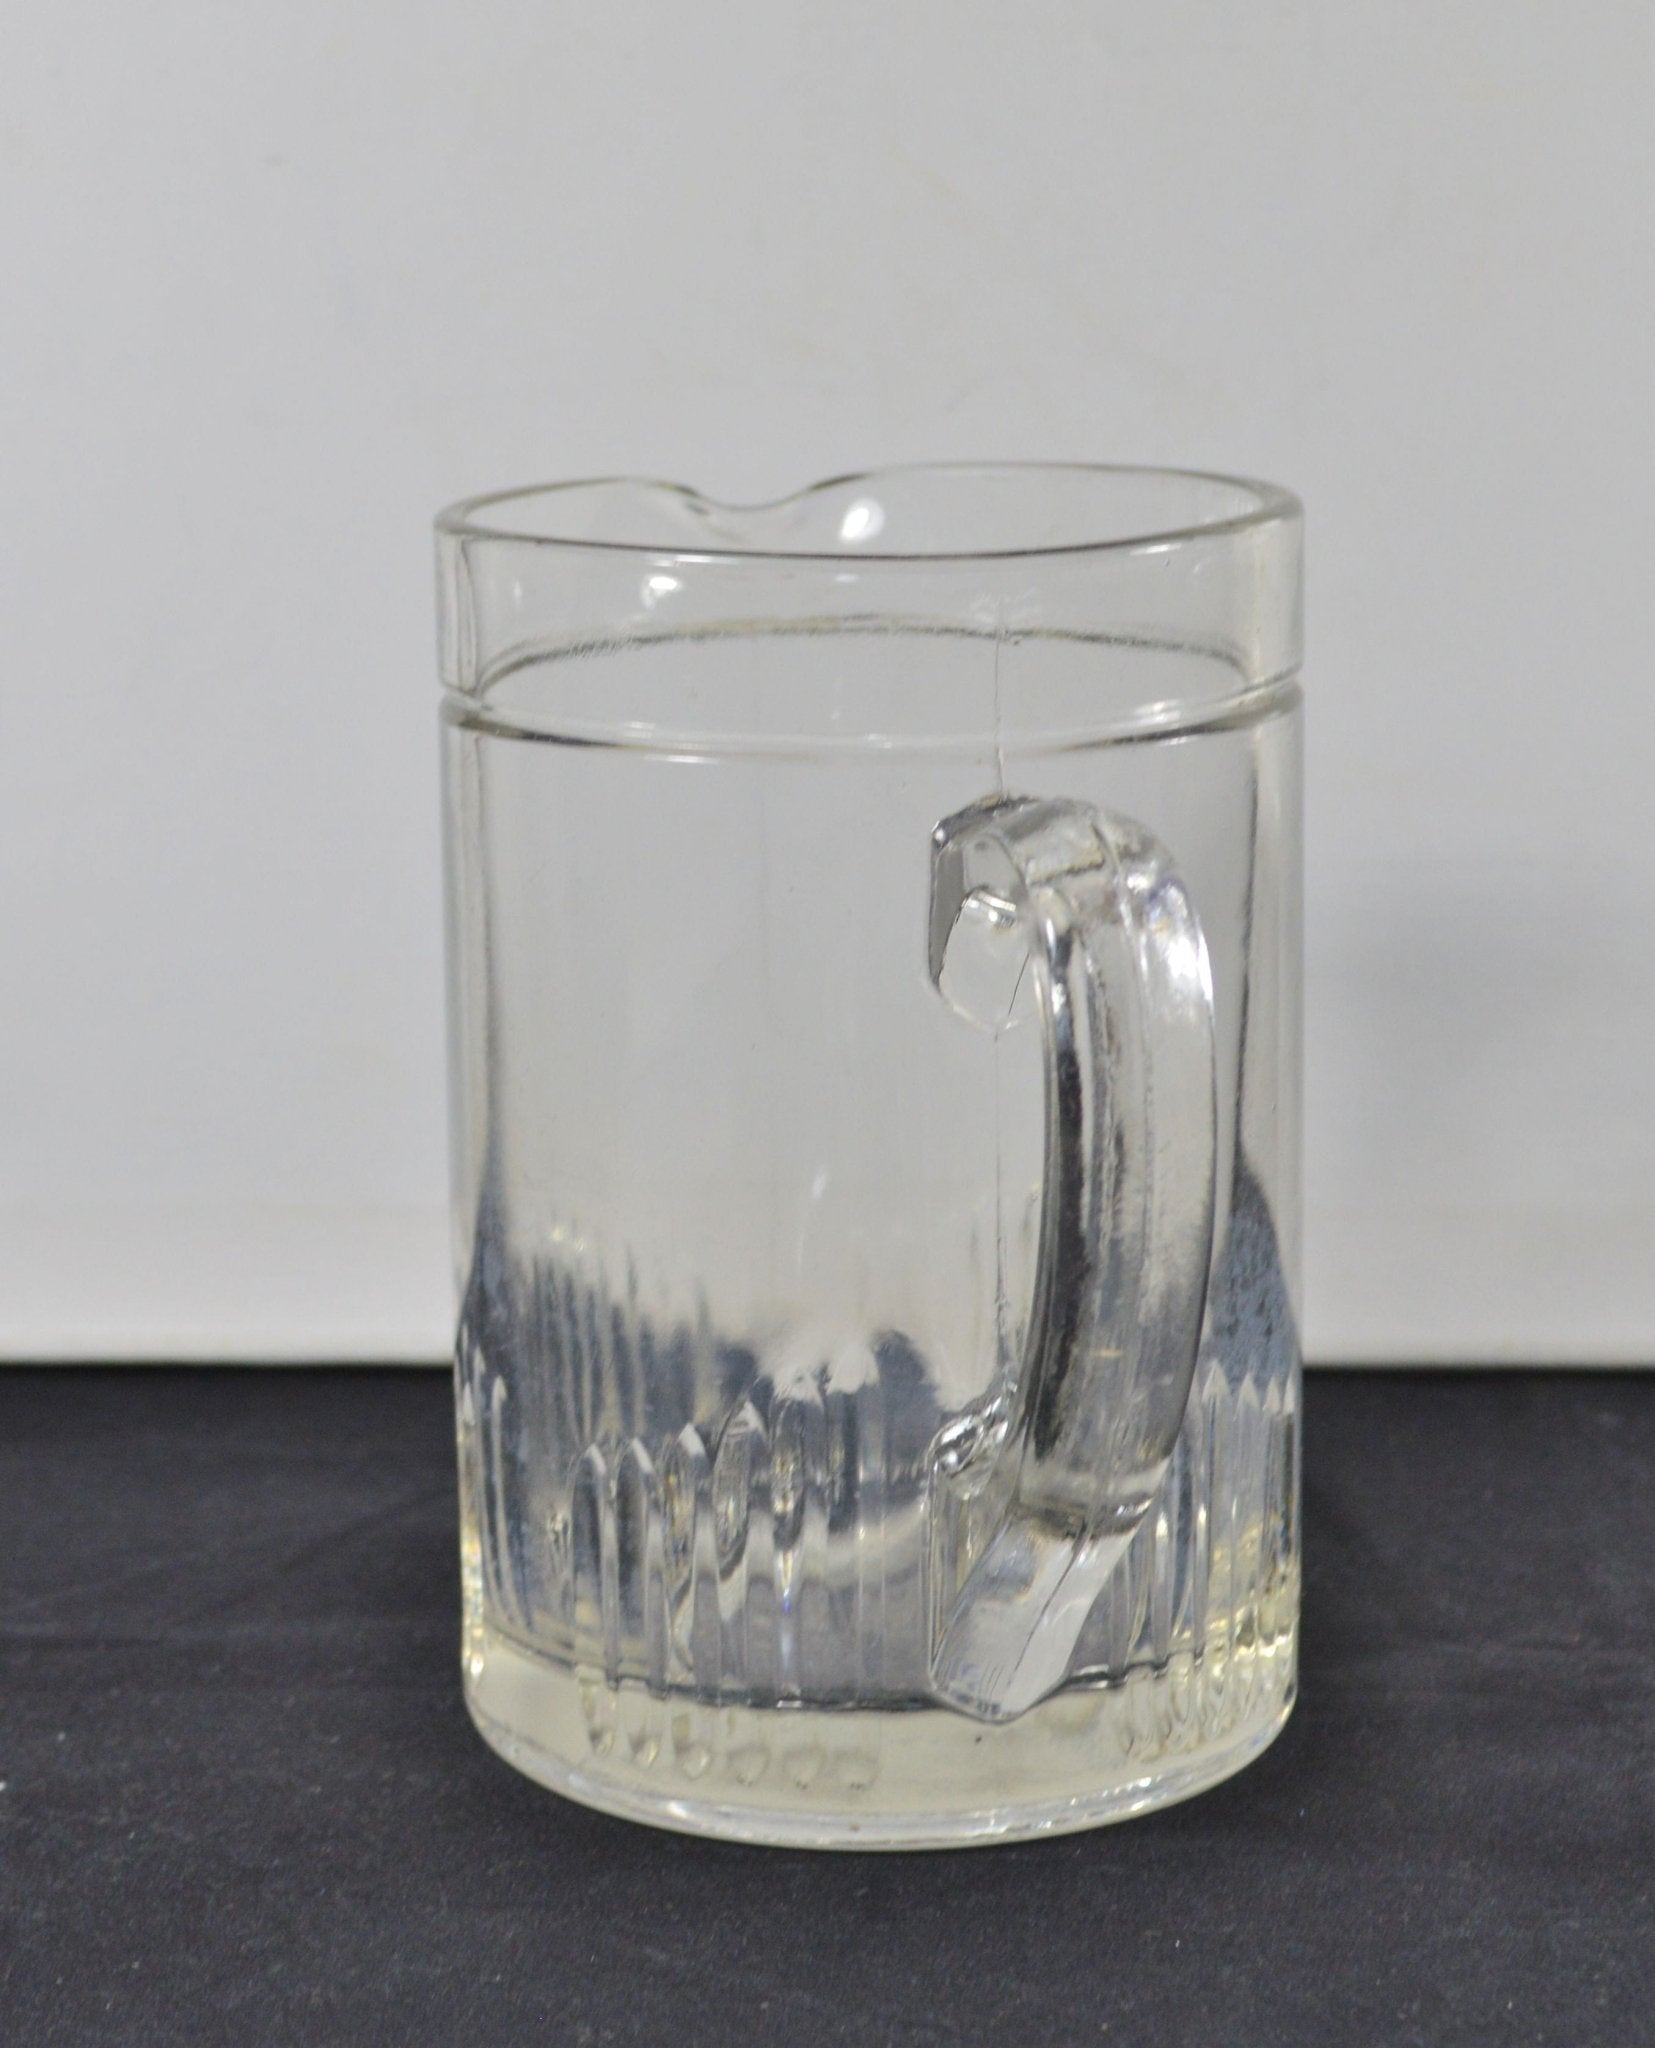 TABLEWARE GLASS JUG(PREVIOUSLY OWNED)FAIRLY GOOD CONDITION - TMD167207